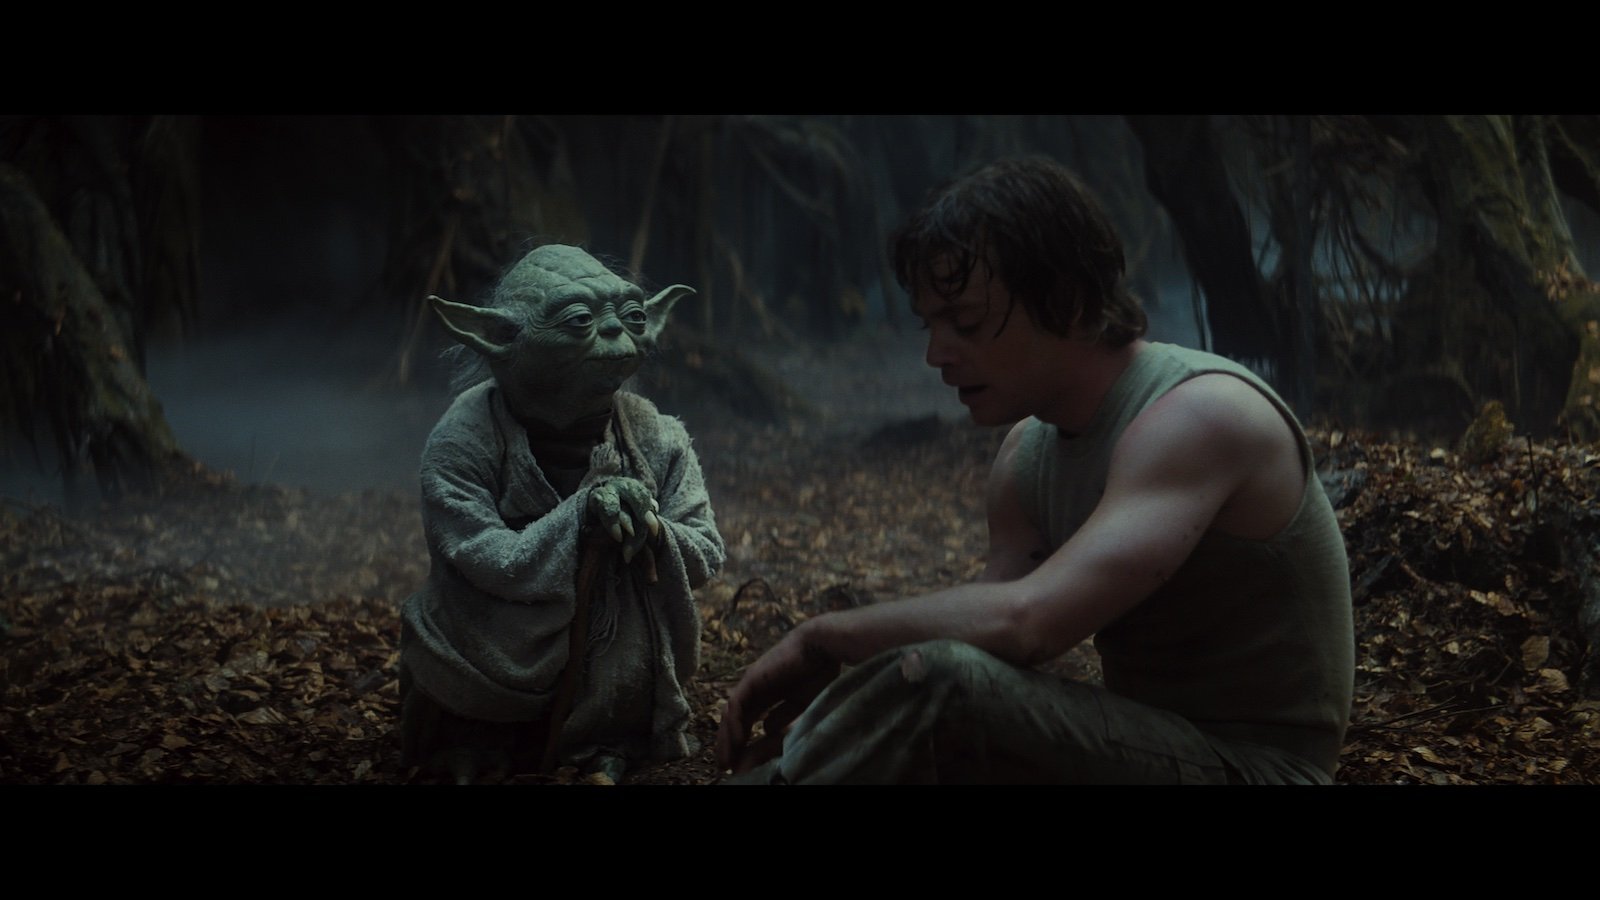 A small green creature named Yoda leans on a cane as he looks at a man in a tank top in a wooded area